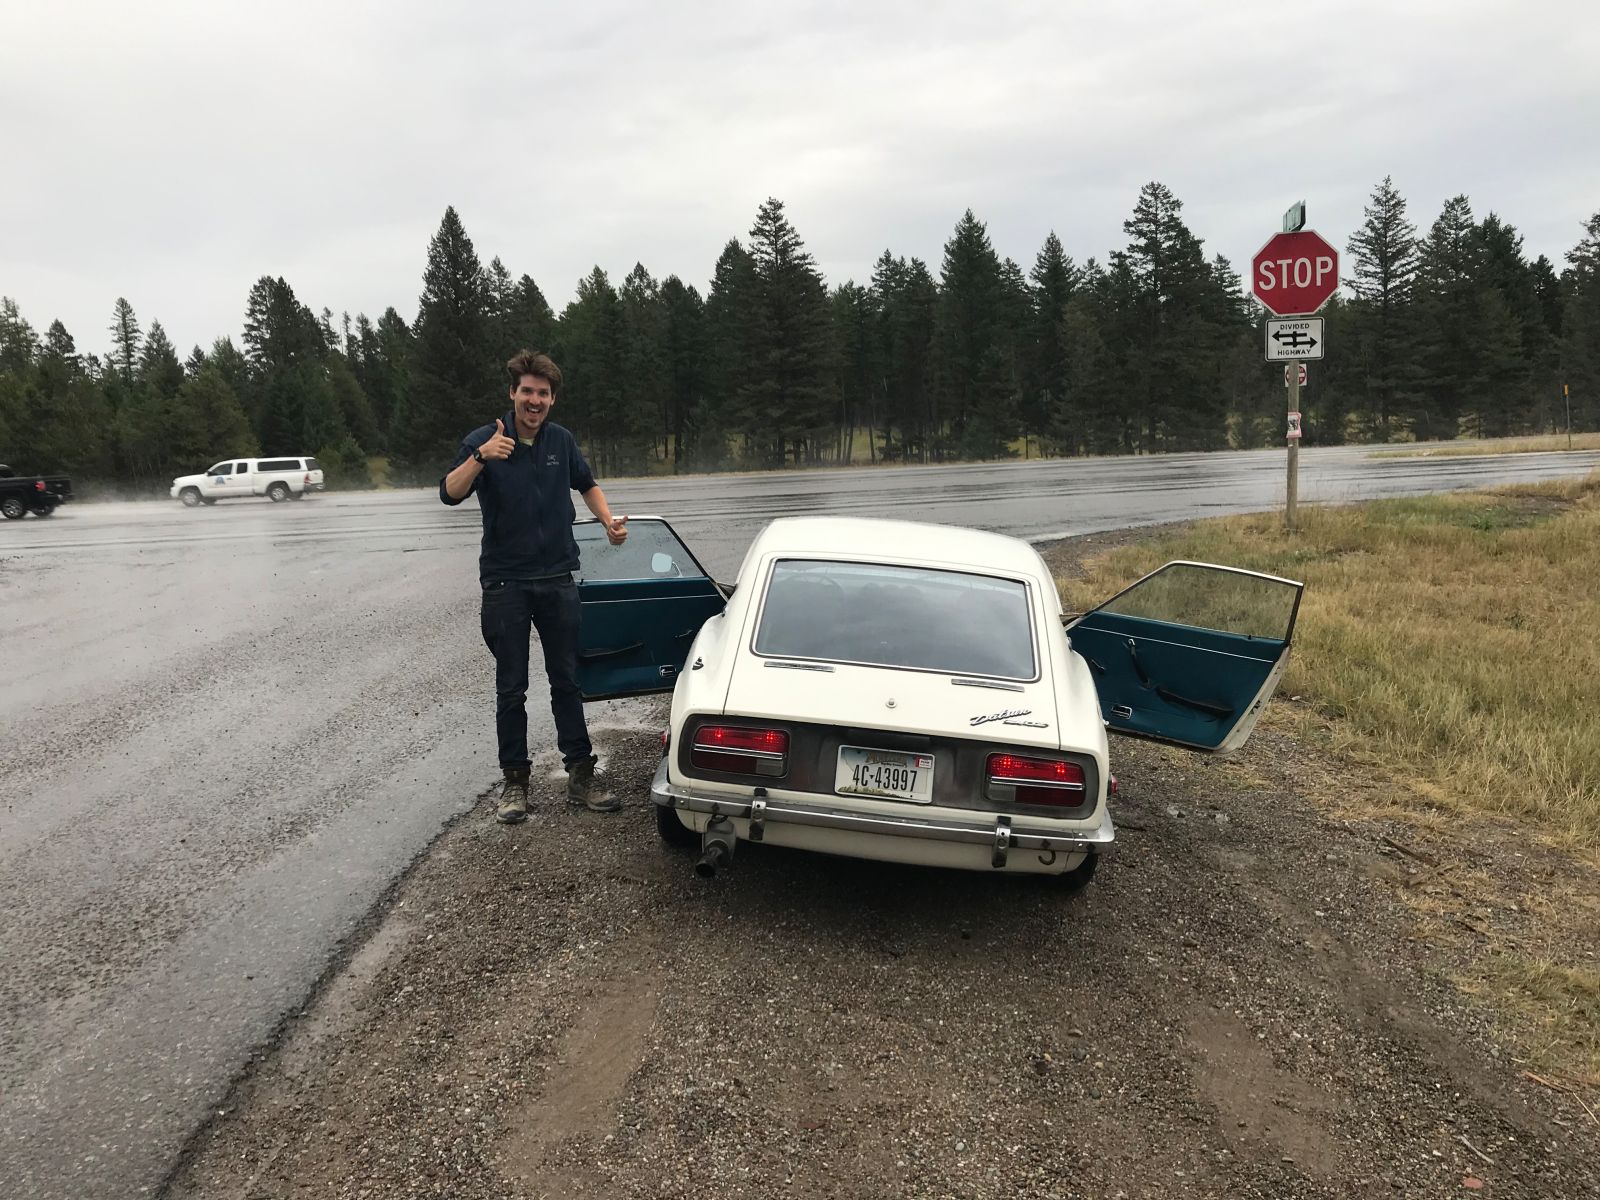 Future Heap Owner getting the full Datsun experience